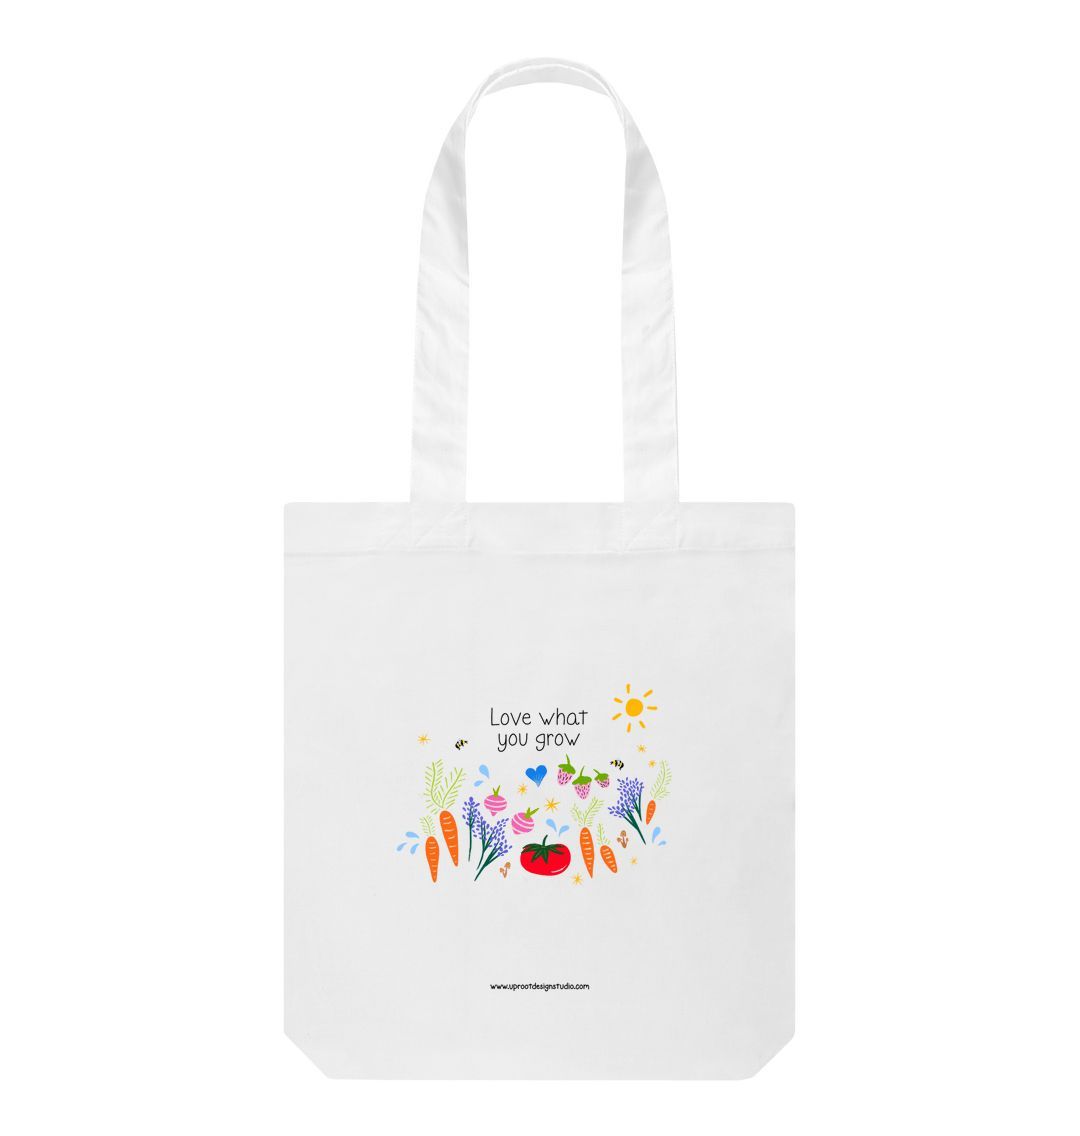 White \"Love What You Grow\" 100% Organic Cotton Grocery Tote Bag w. vegetables, fruit, raindrops, stars & sun